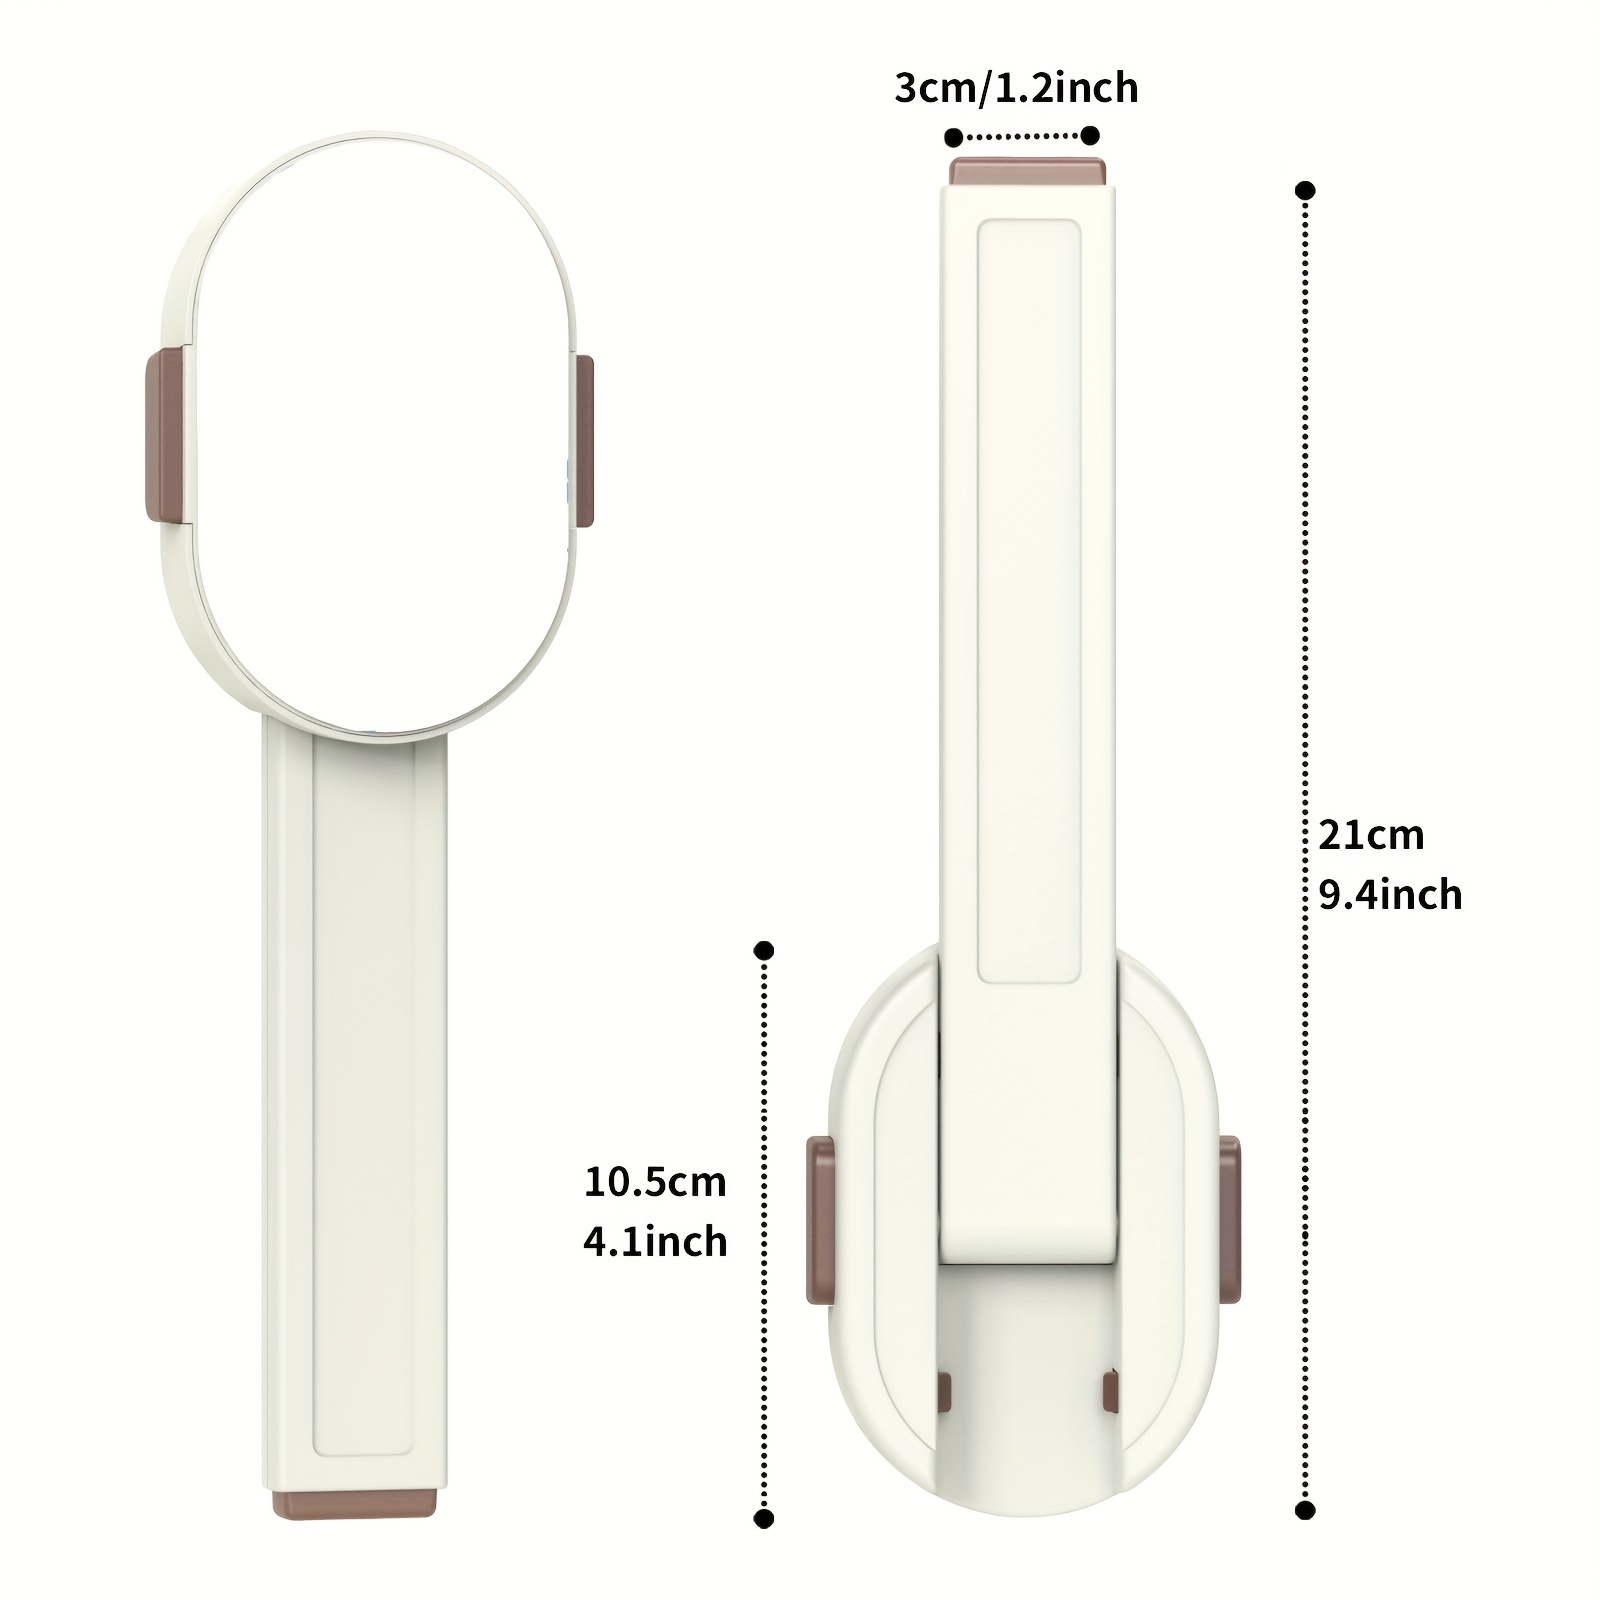 Toilet Lock Child Safety, Toilet Locks Baby Proof, Baby Child Proof Toilet  Seat Safe Lock, Prevents Opening, Simple Operation, Various Use, Adhesive